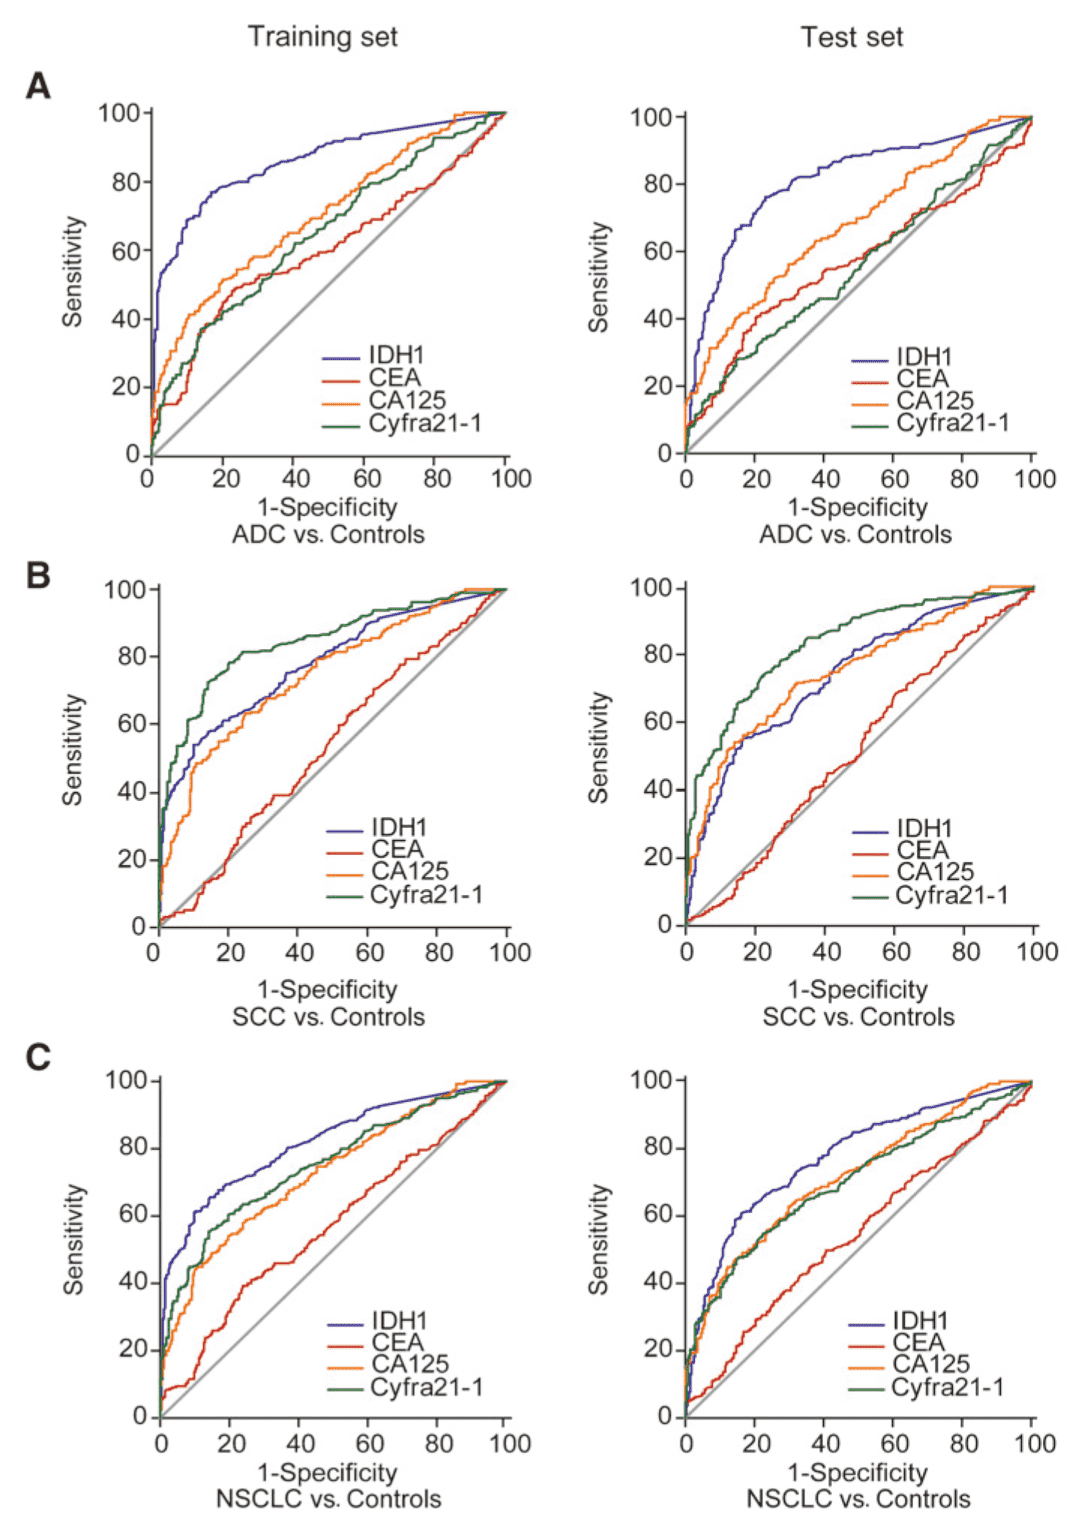 ROC curve analyses of the use of IDH1, CEA, CA125, and Cyfra21-1 to differentiate NSCLC cases and controls.